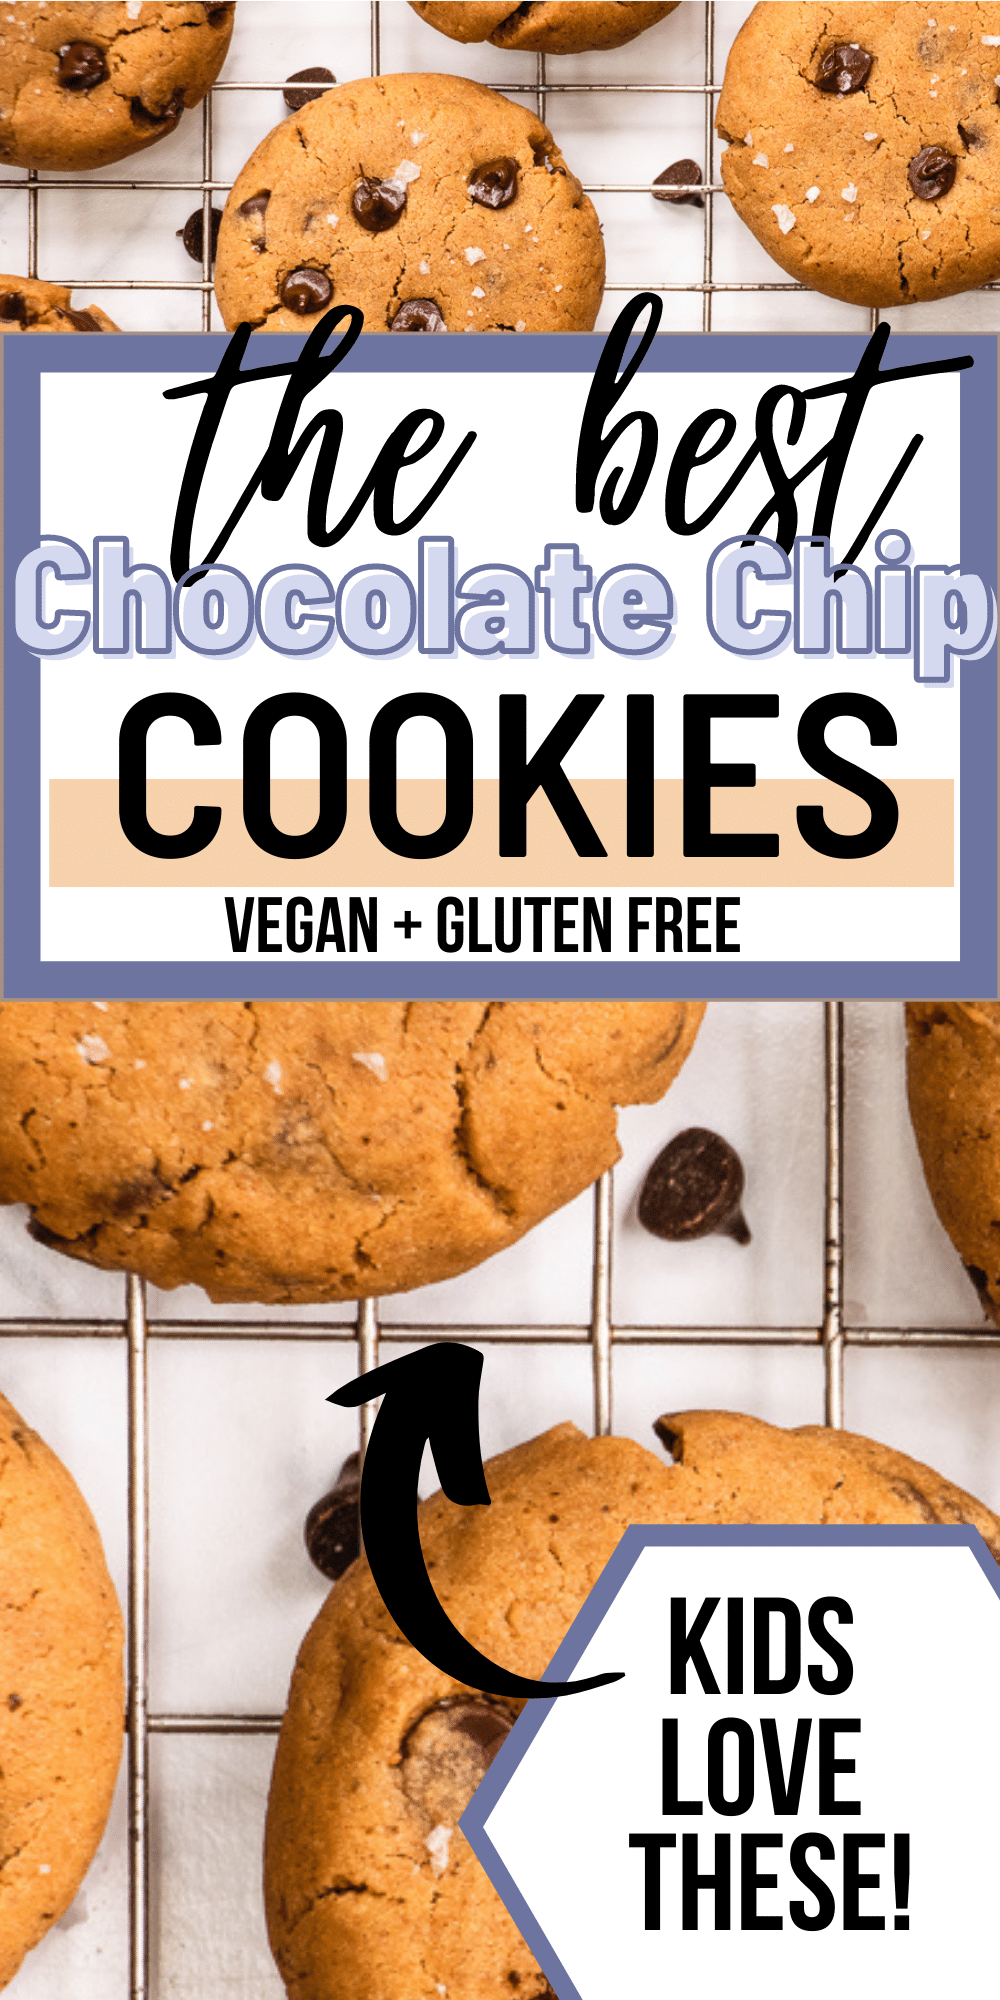 Vegan Peanut Butter Chocolate Chip Cookies are chewy, soft, and packed with chocolate! These are truly the best gluten-free cookies you'll ever make.